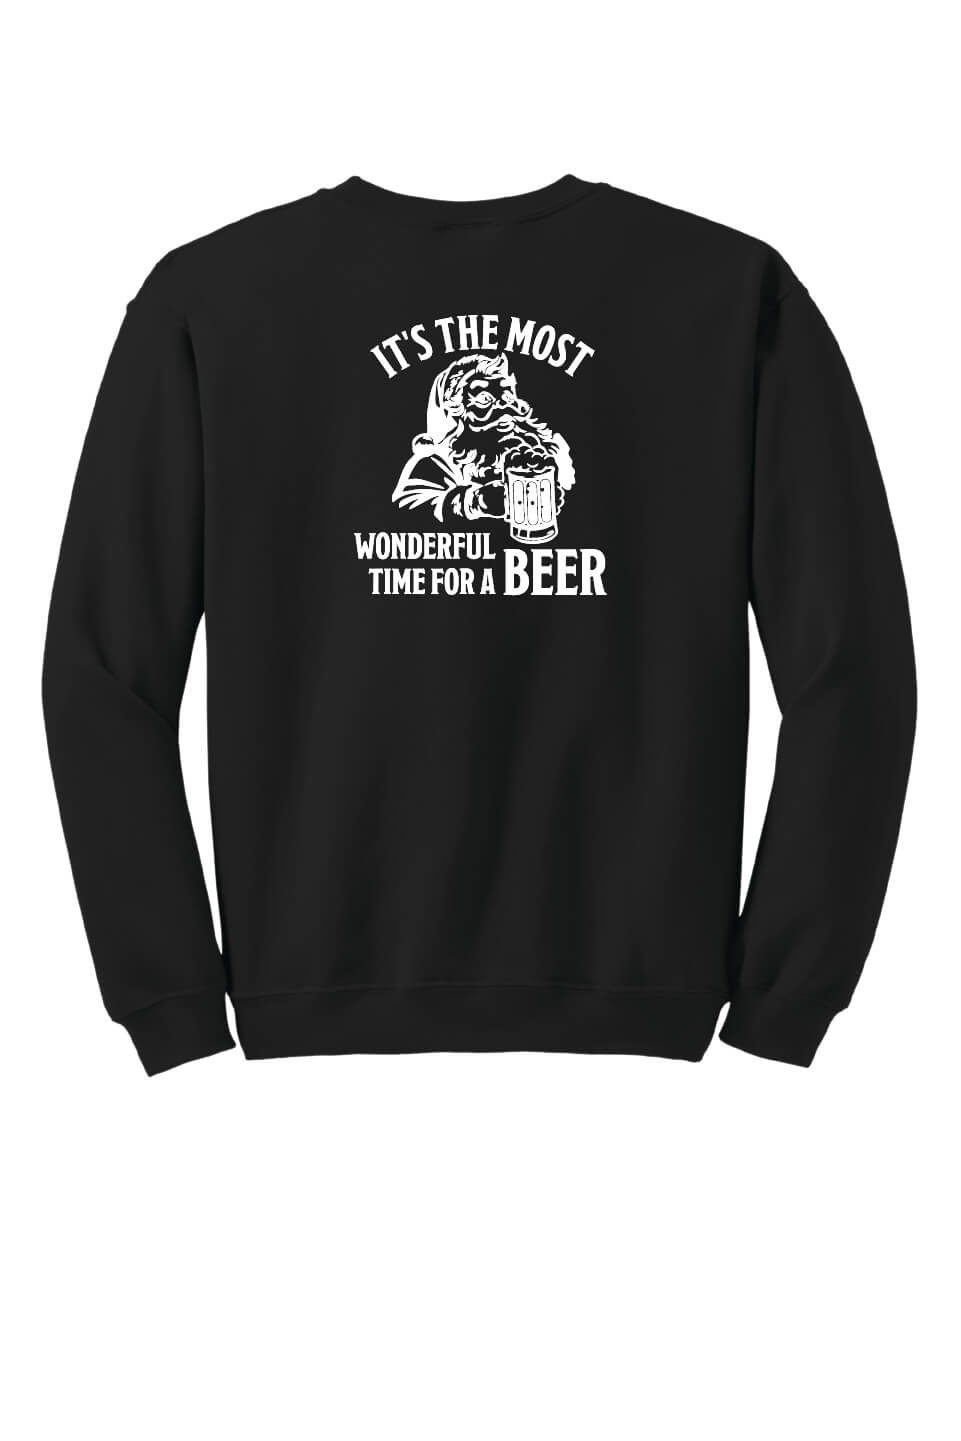 It's the Most Wonderful Time for a Beer crewneck sweatshirt back